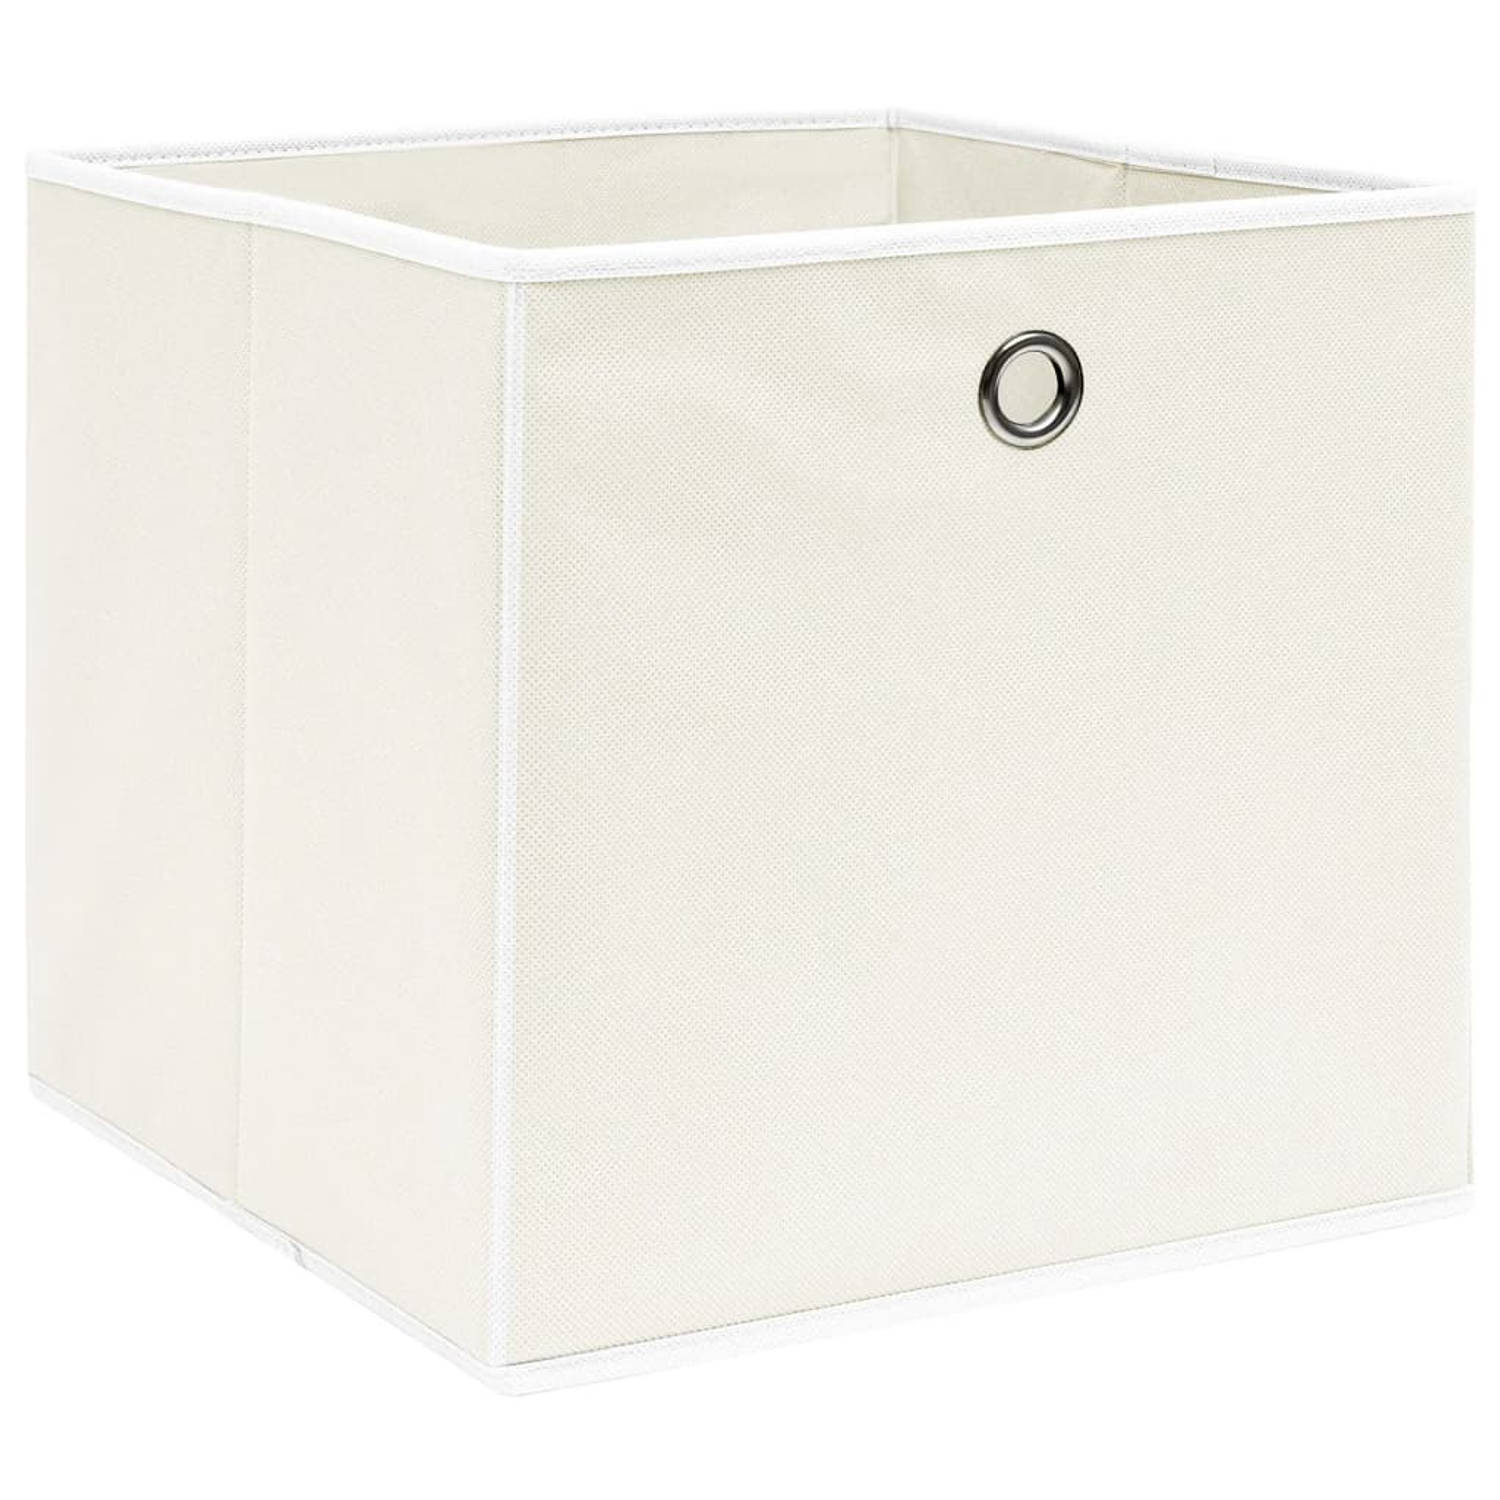 The Living Store Opbergboxen 4 st 32x32x32 cm stof wit - Opberger